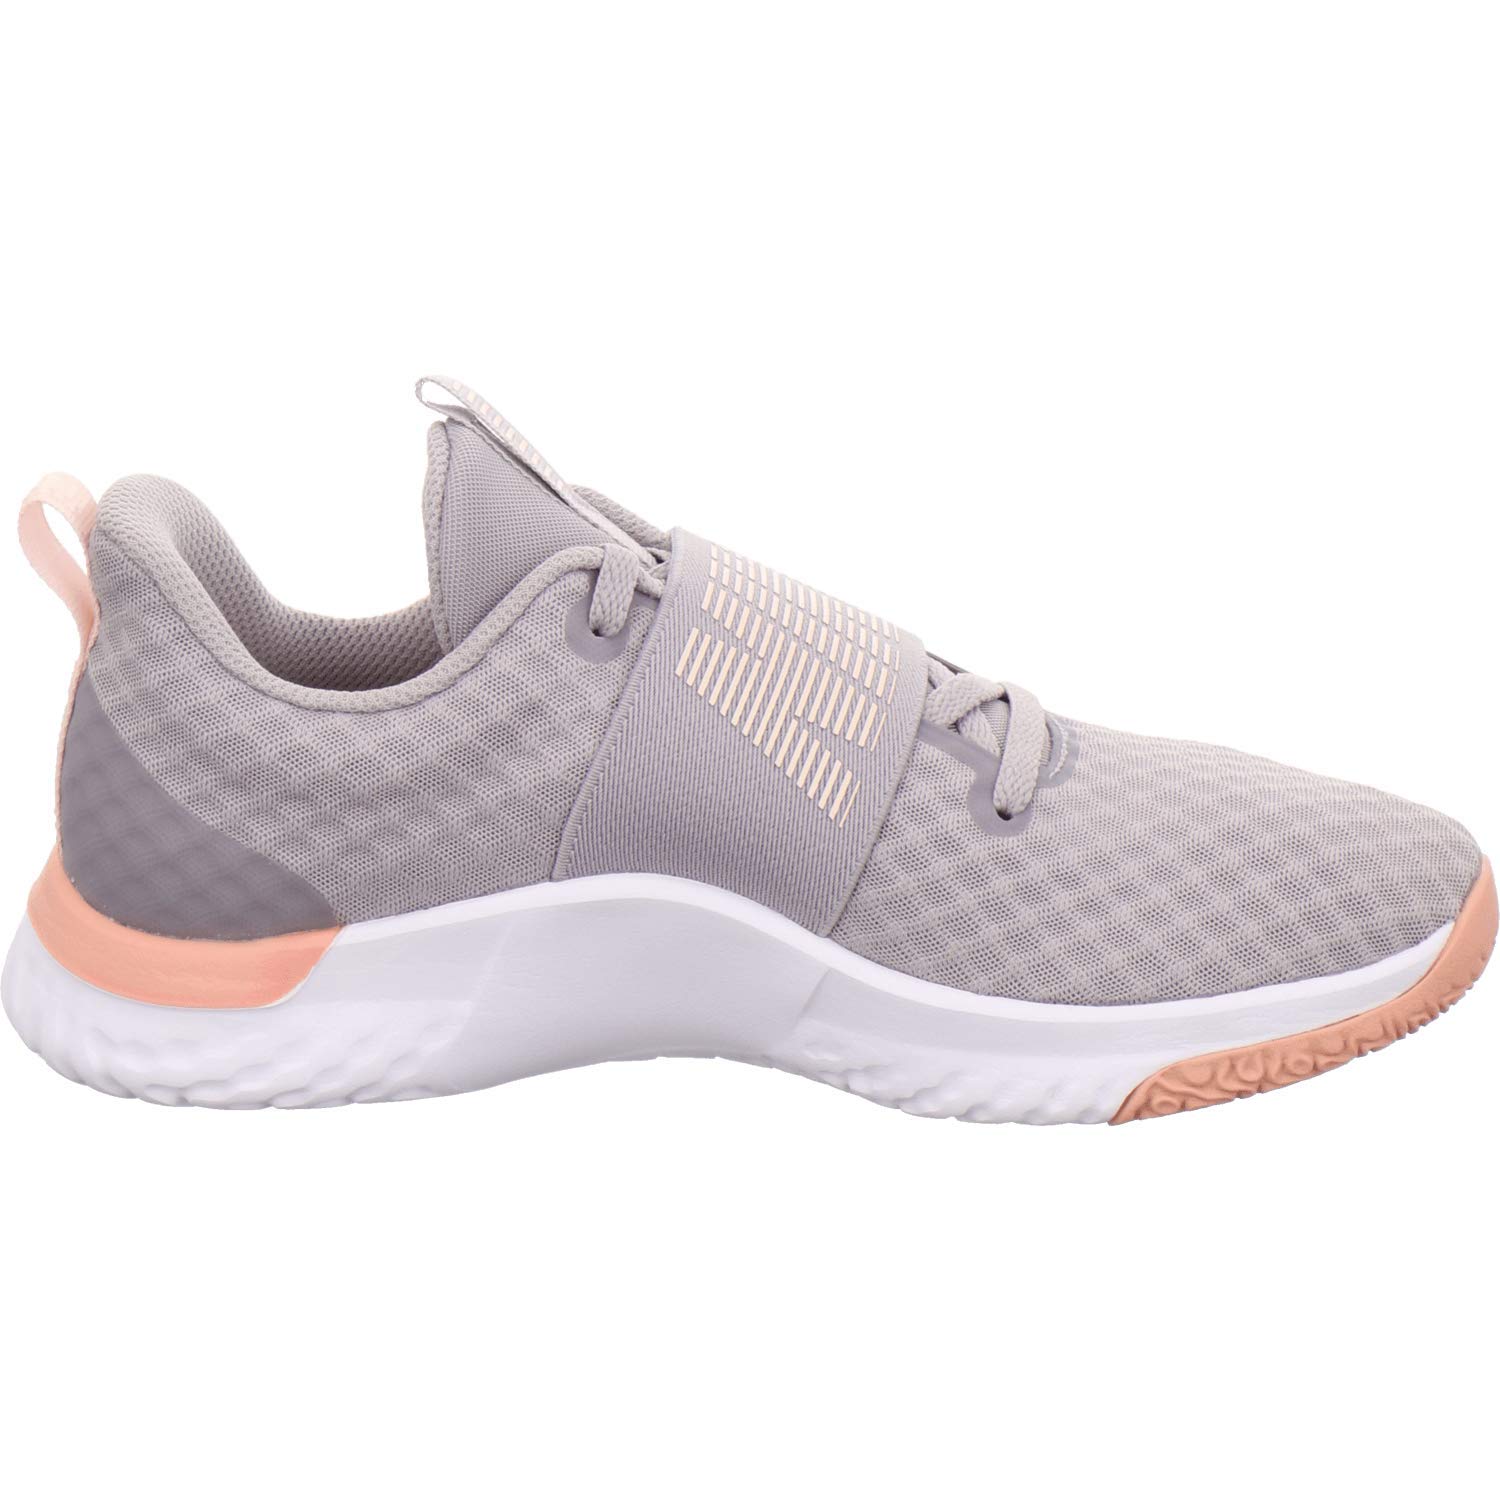 Nike Women's Fitness Shoes, Grey/Pink, 8.5